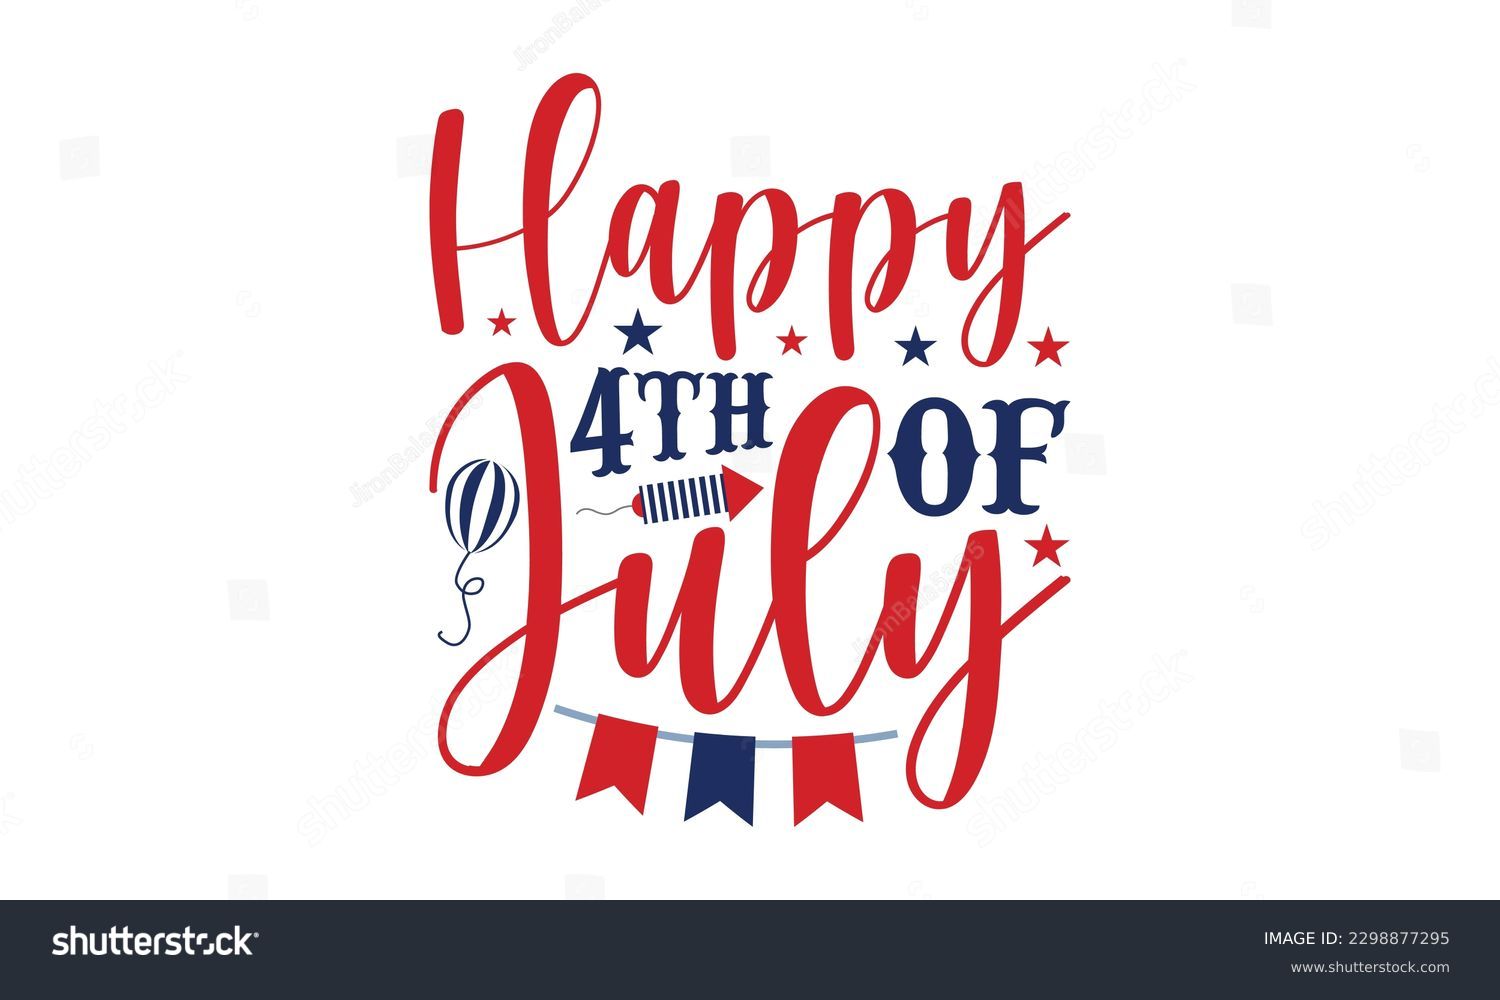 SVG of Happy Fourth Of July - 4th of July SVG Design, Hand written vector design, Illustration for prints on t-shirts, bags, posters, cards and Mug.
 svg